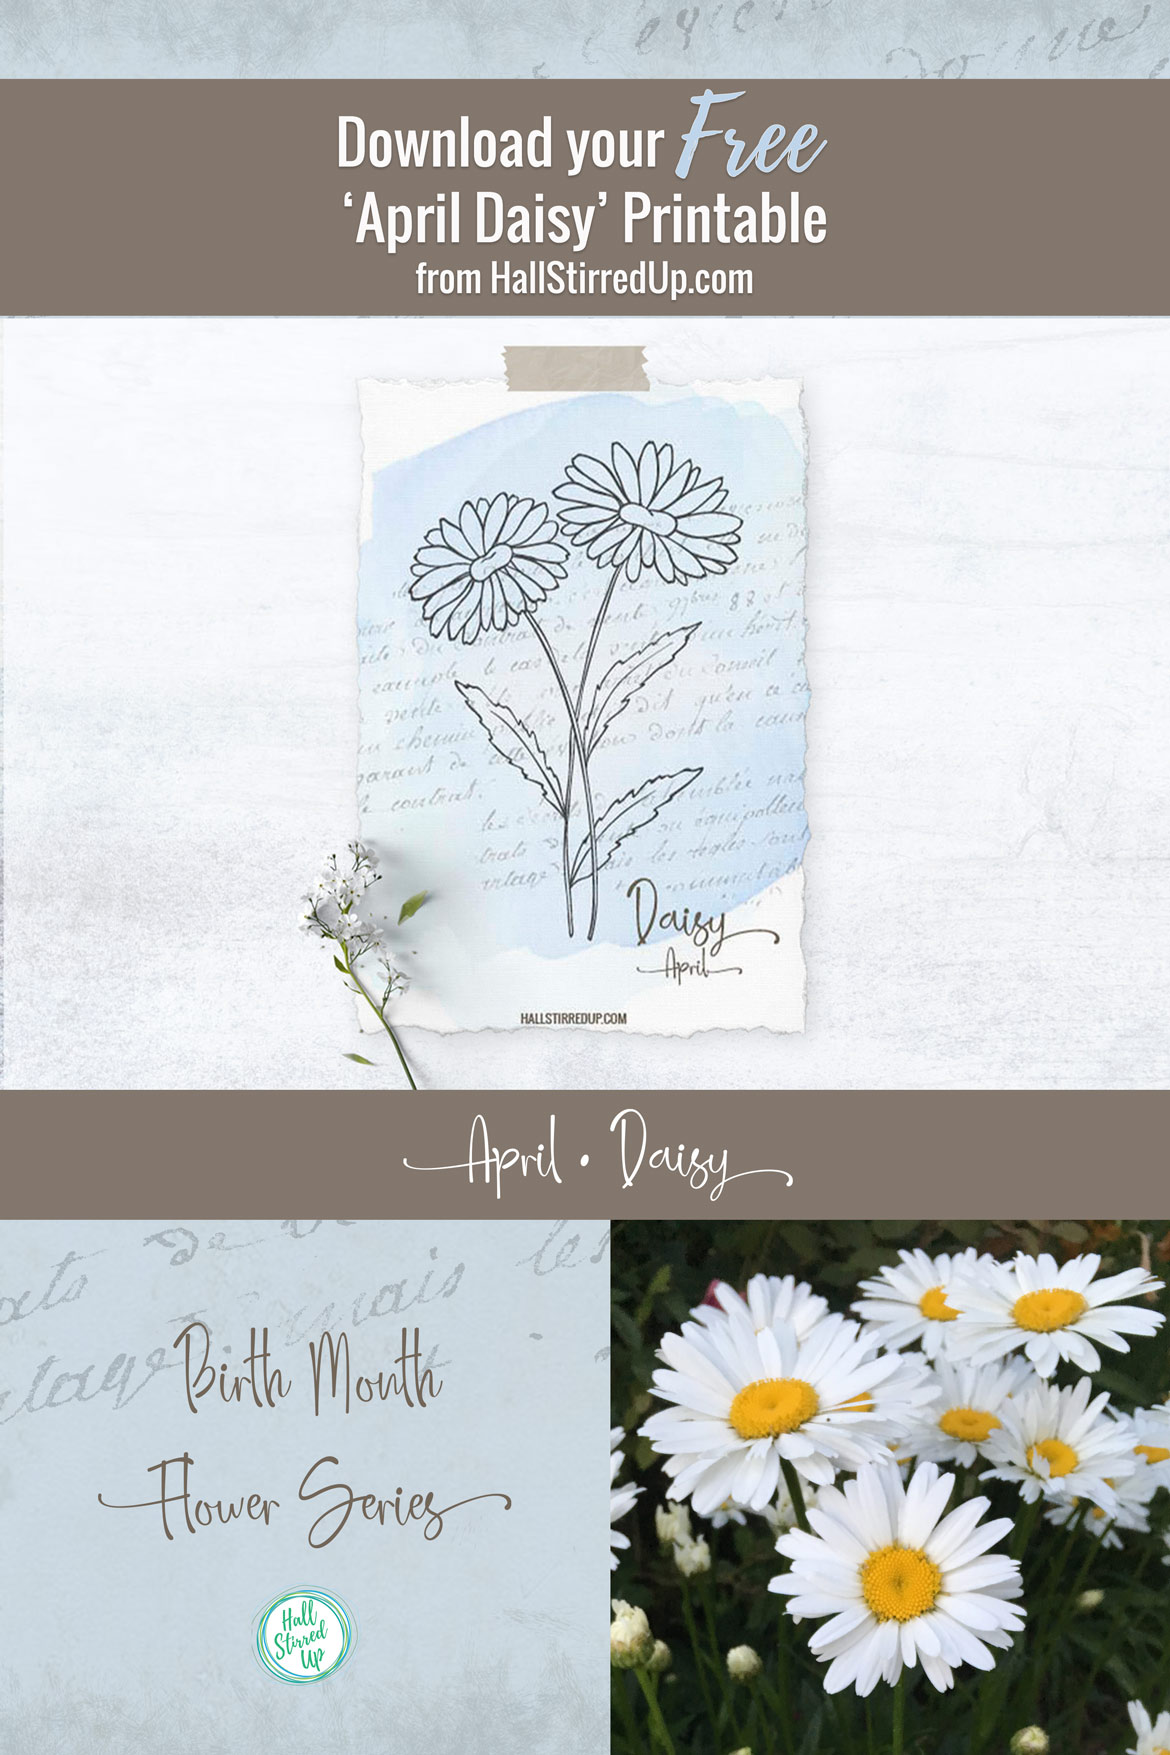 April's Birth Flower is the pretty Daisy and includes a free printable!